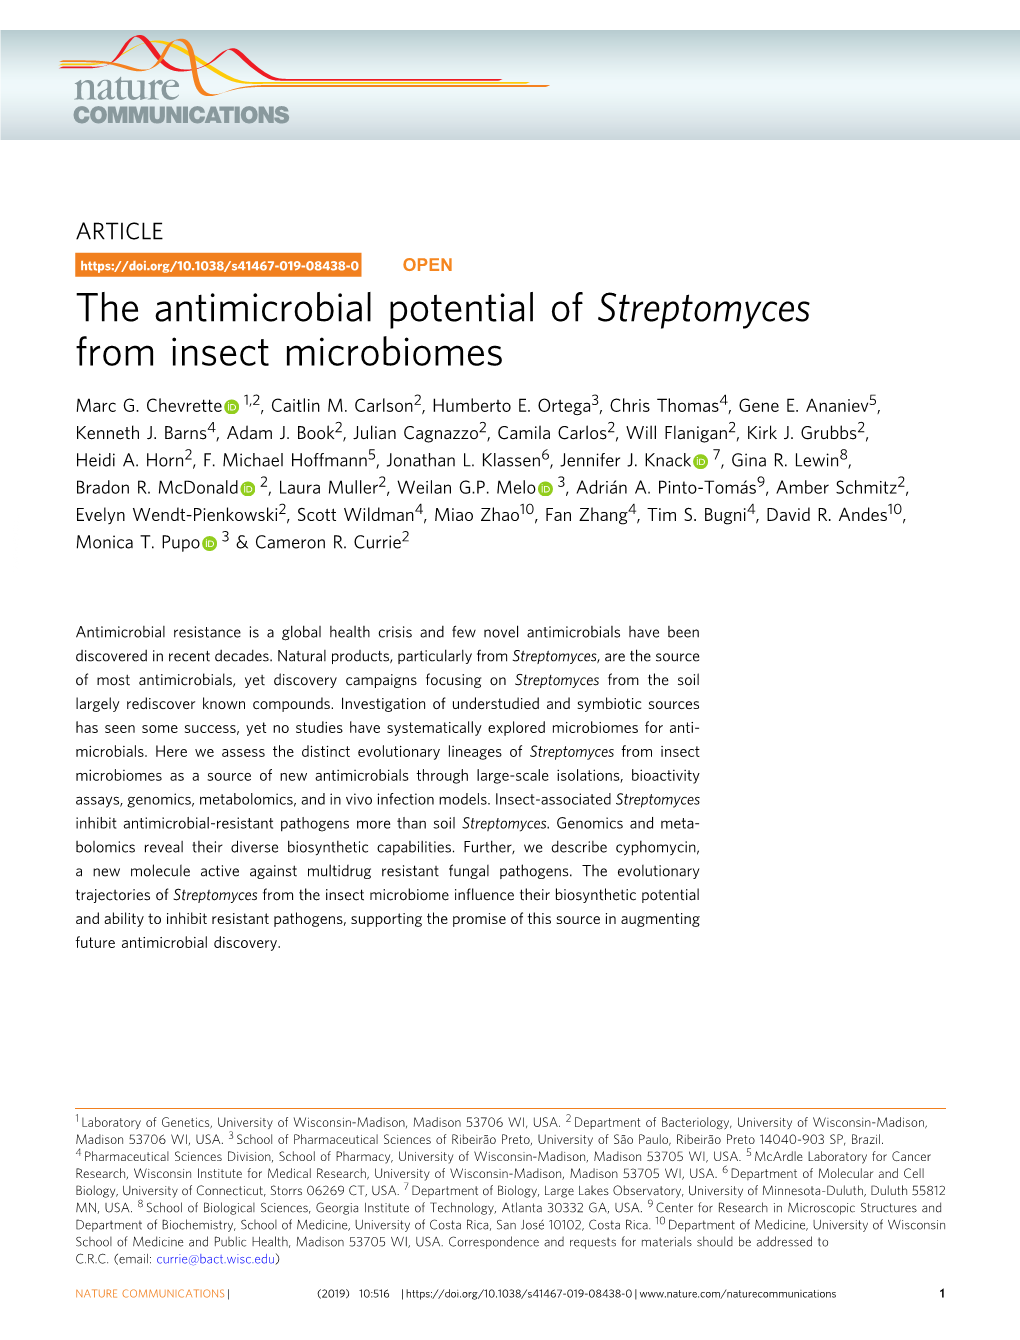 The Antimicrobial Potential of Streptomyces from Insect Microbiomes